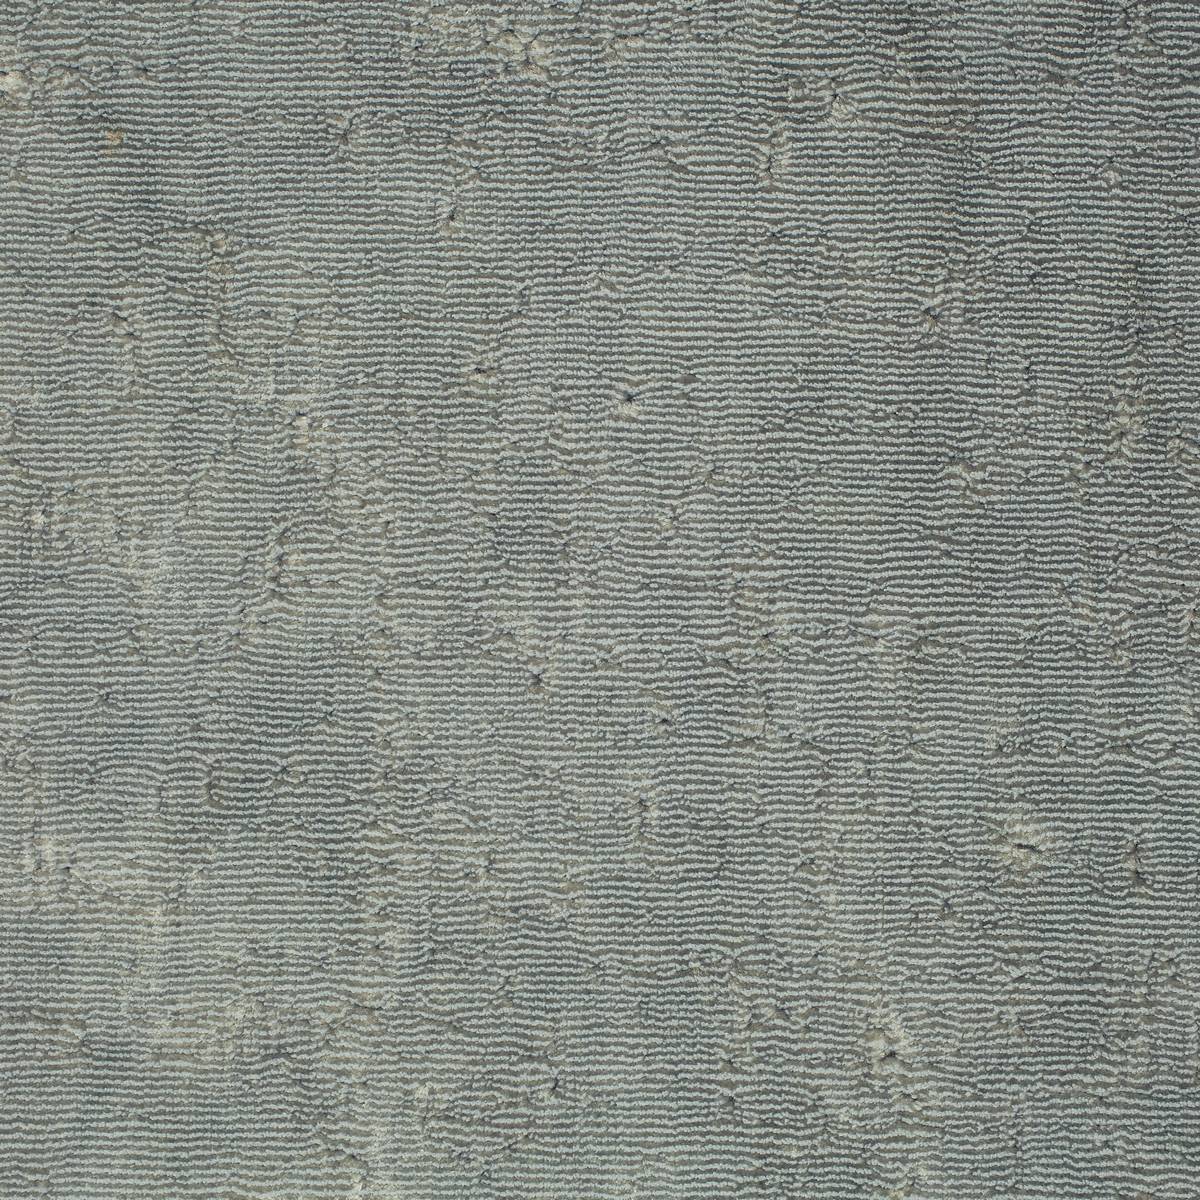 Curzon Silver Fabric by Zoffany